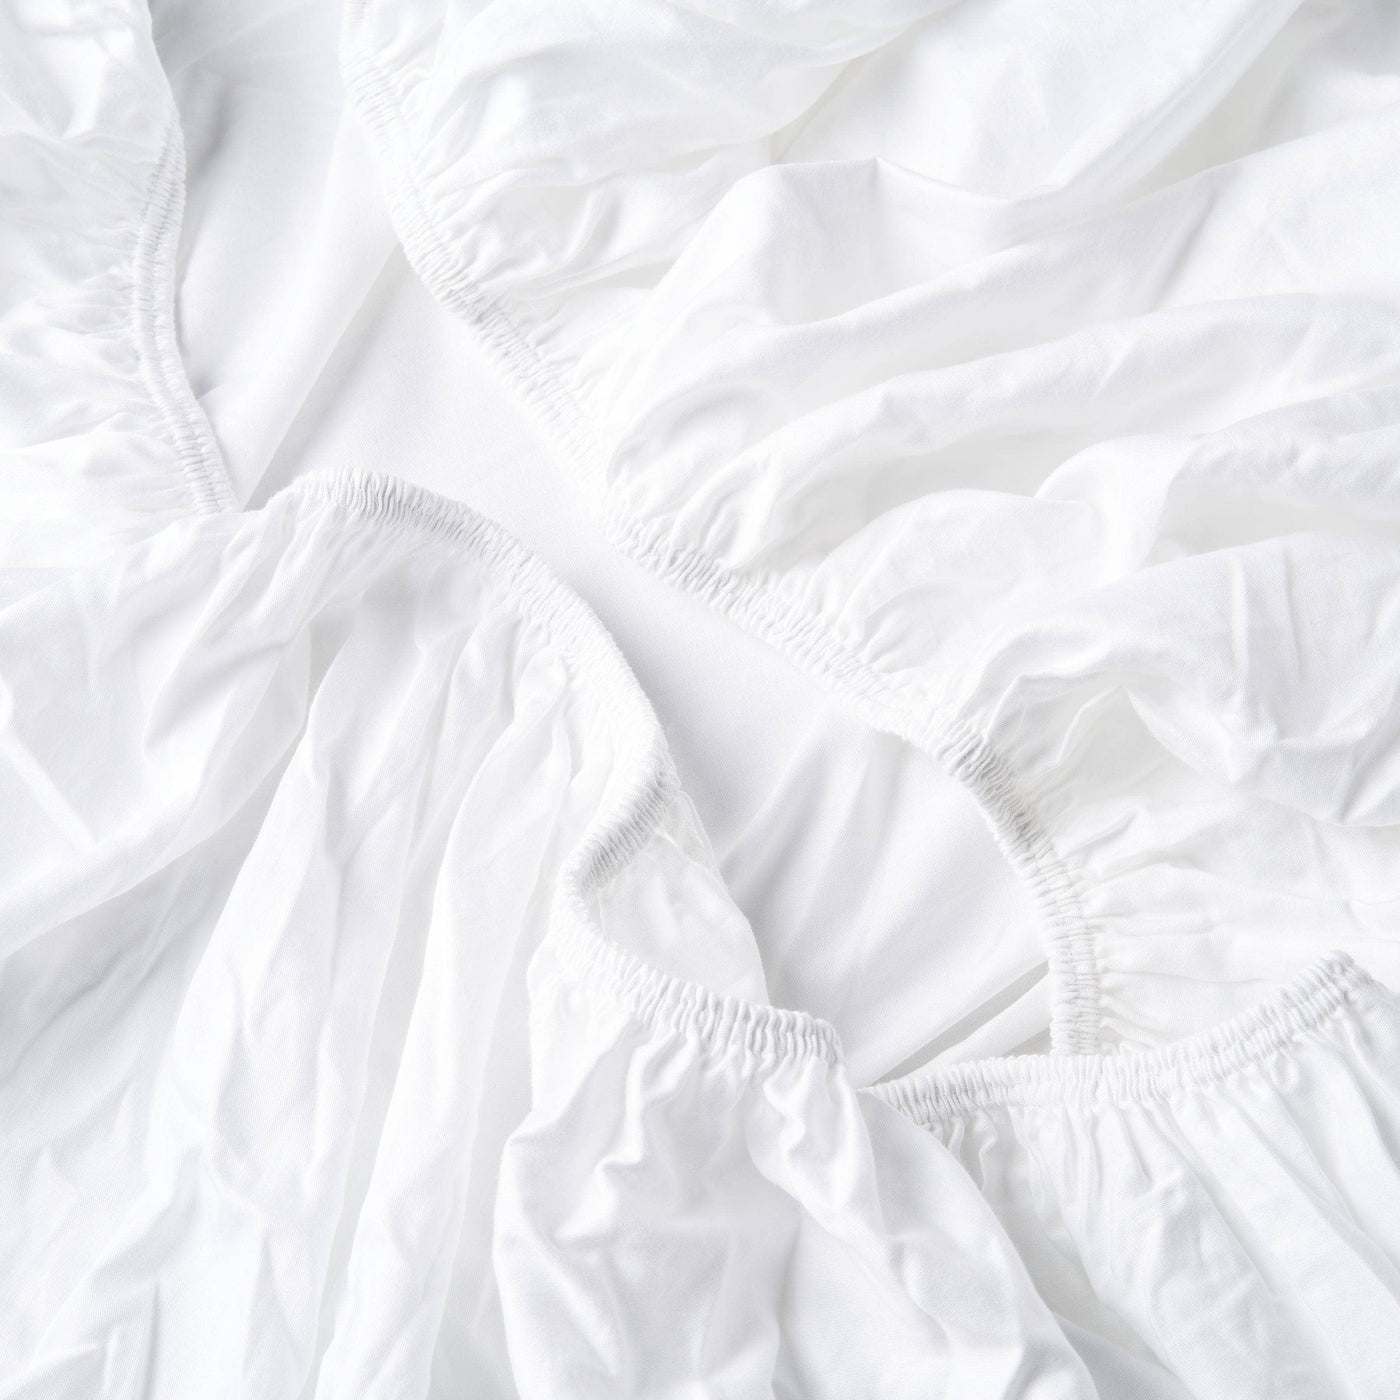 Darcy 100% Turkish Cotton 210 TC Fitted Sheet, White, Super King Size Bed Sheets sazy.com